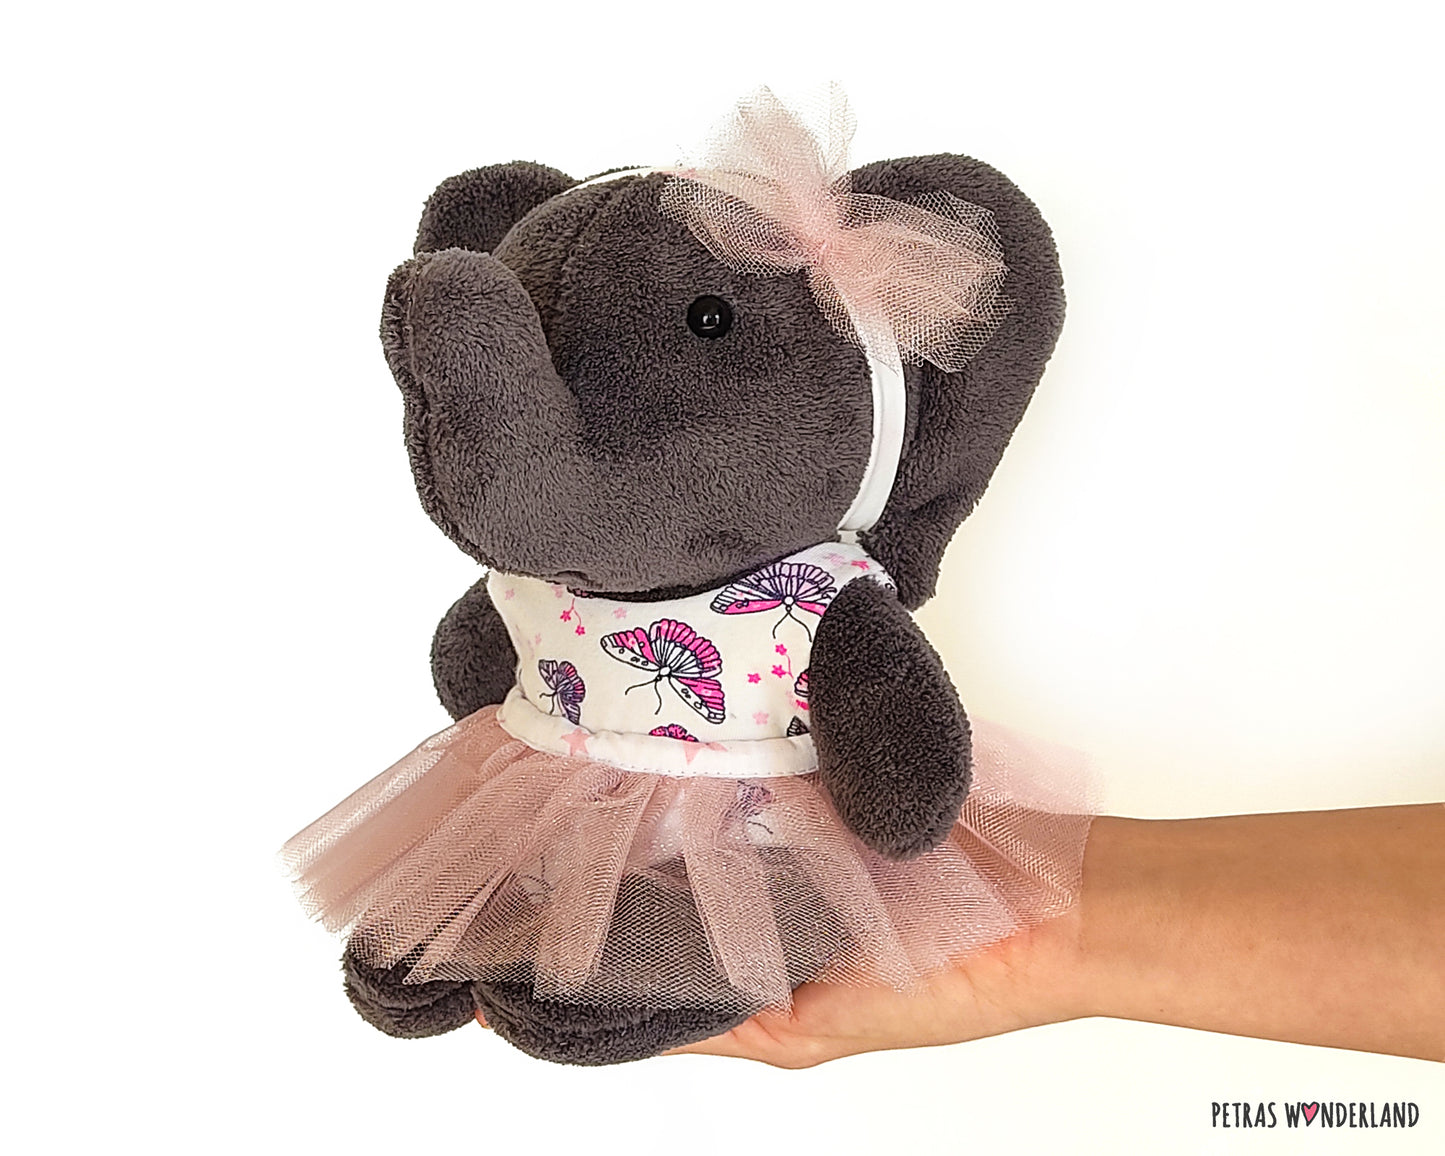 Baby Animal Elephant - PDF sewing pattern and tutorial 01